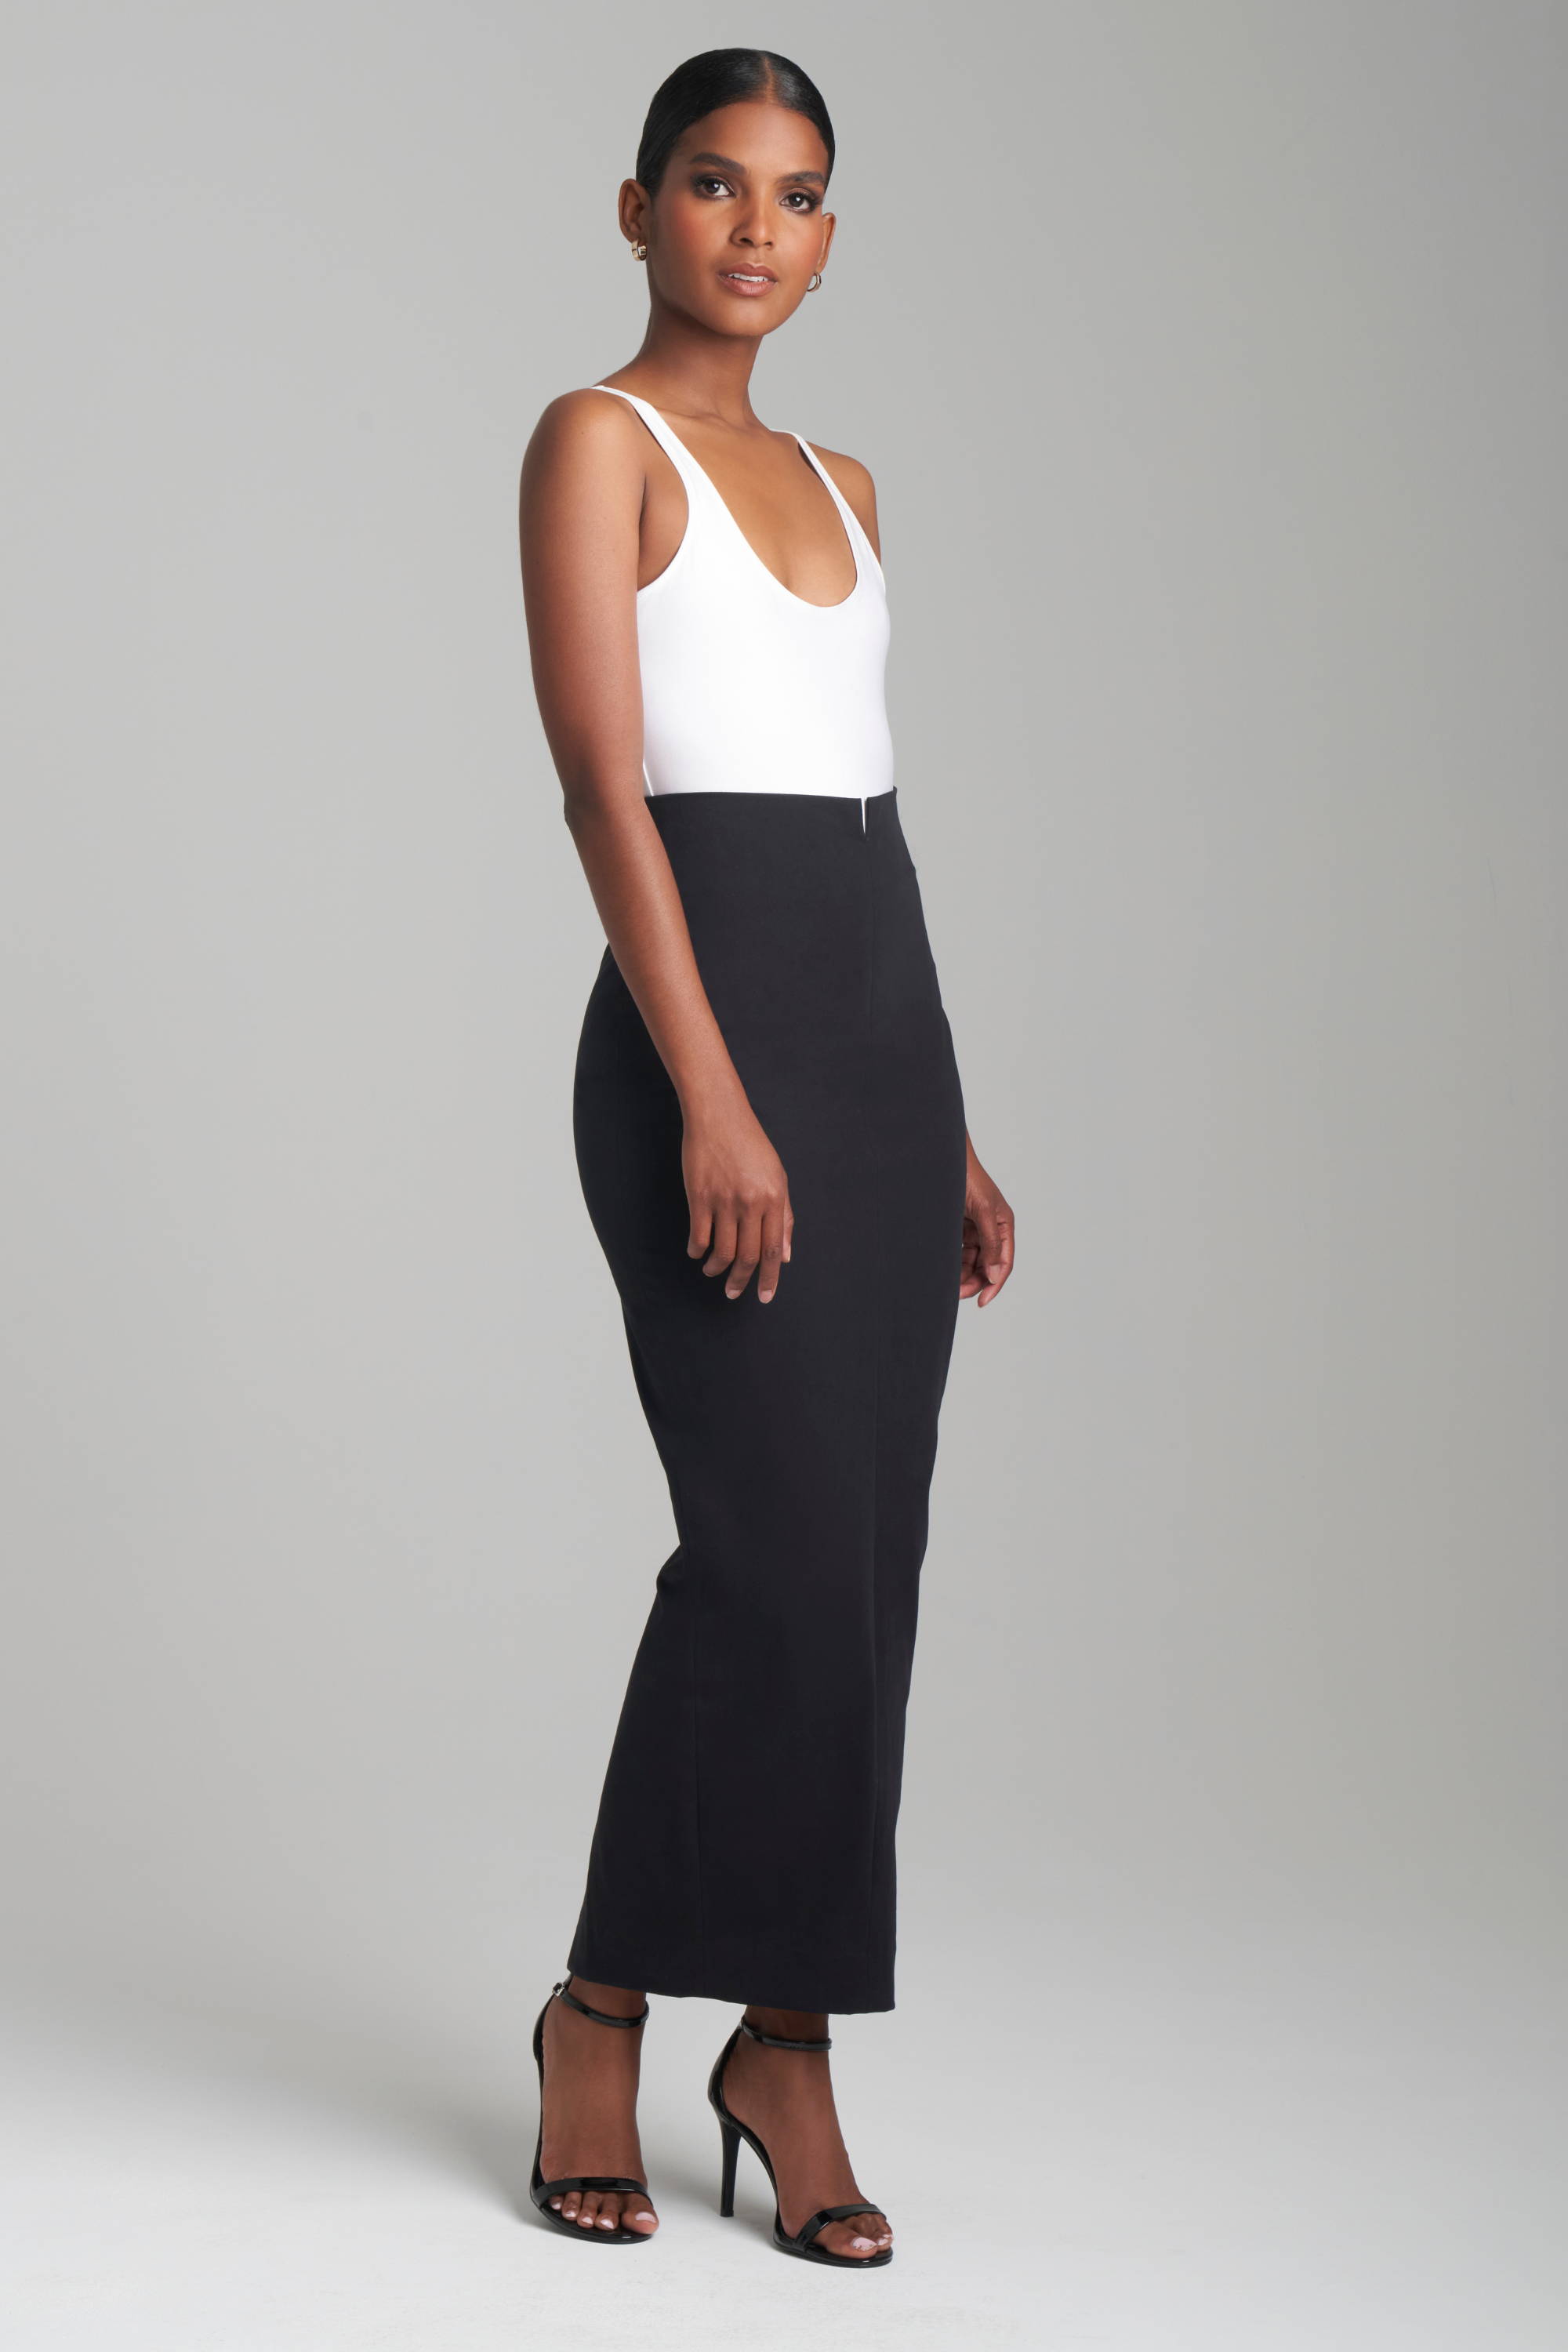 Woman wearing black stretch cotton pencil skirt with white tank top by Ala von Auersperg